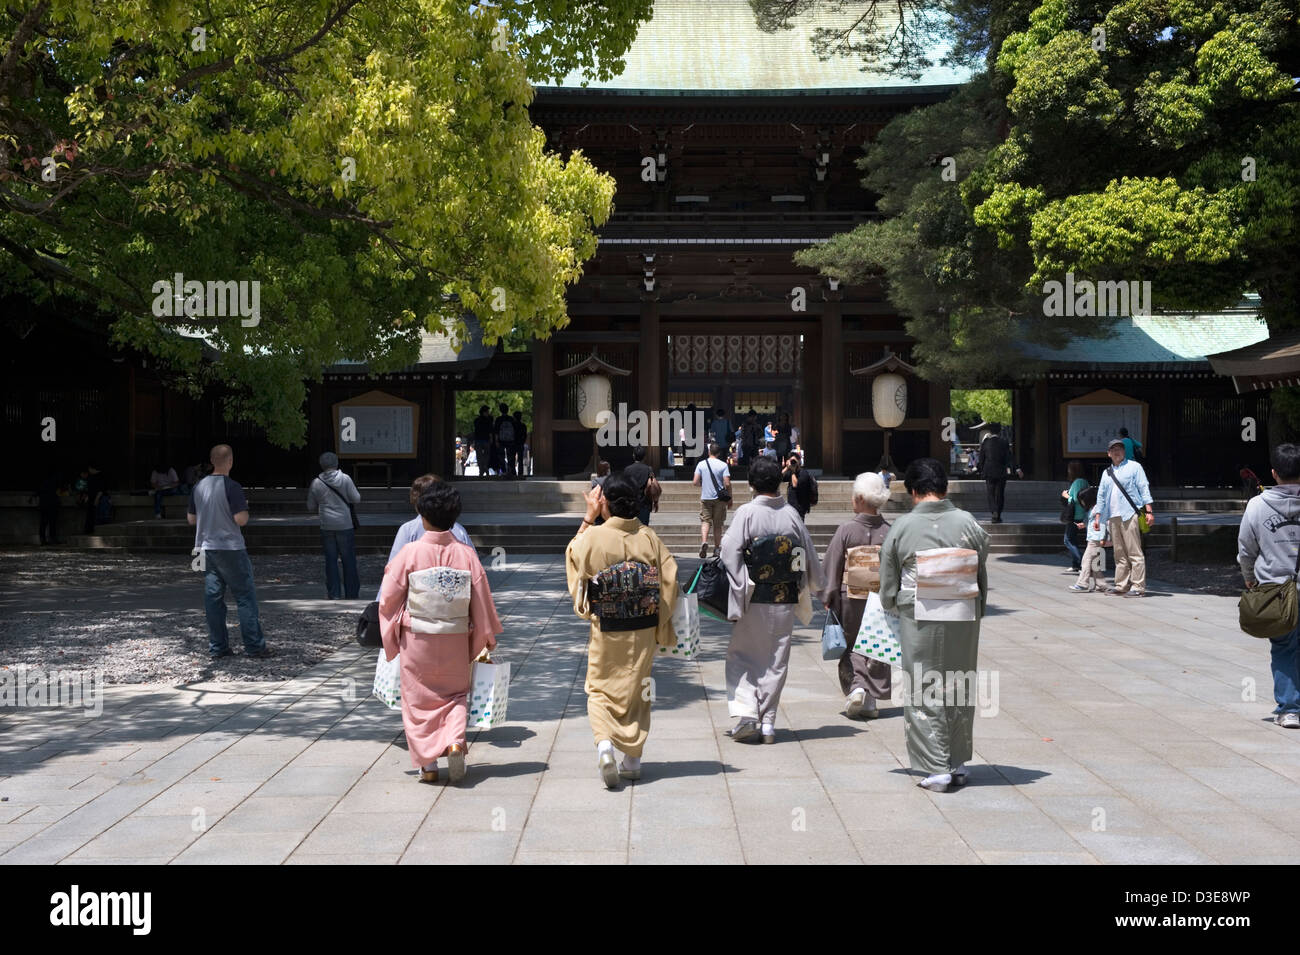 A group of women wearing traditional kimono approach the main gate at the Imperial Meiji Jingu shrine in Tokyo. Stock Photo